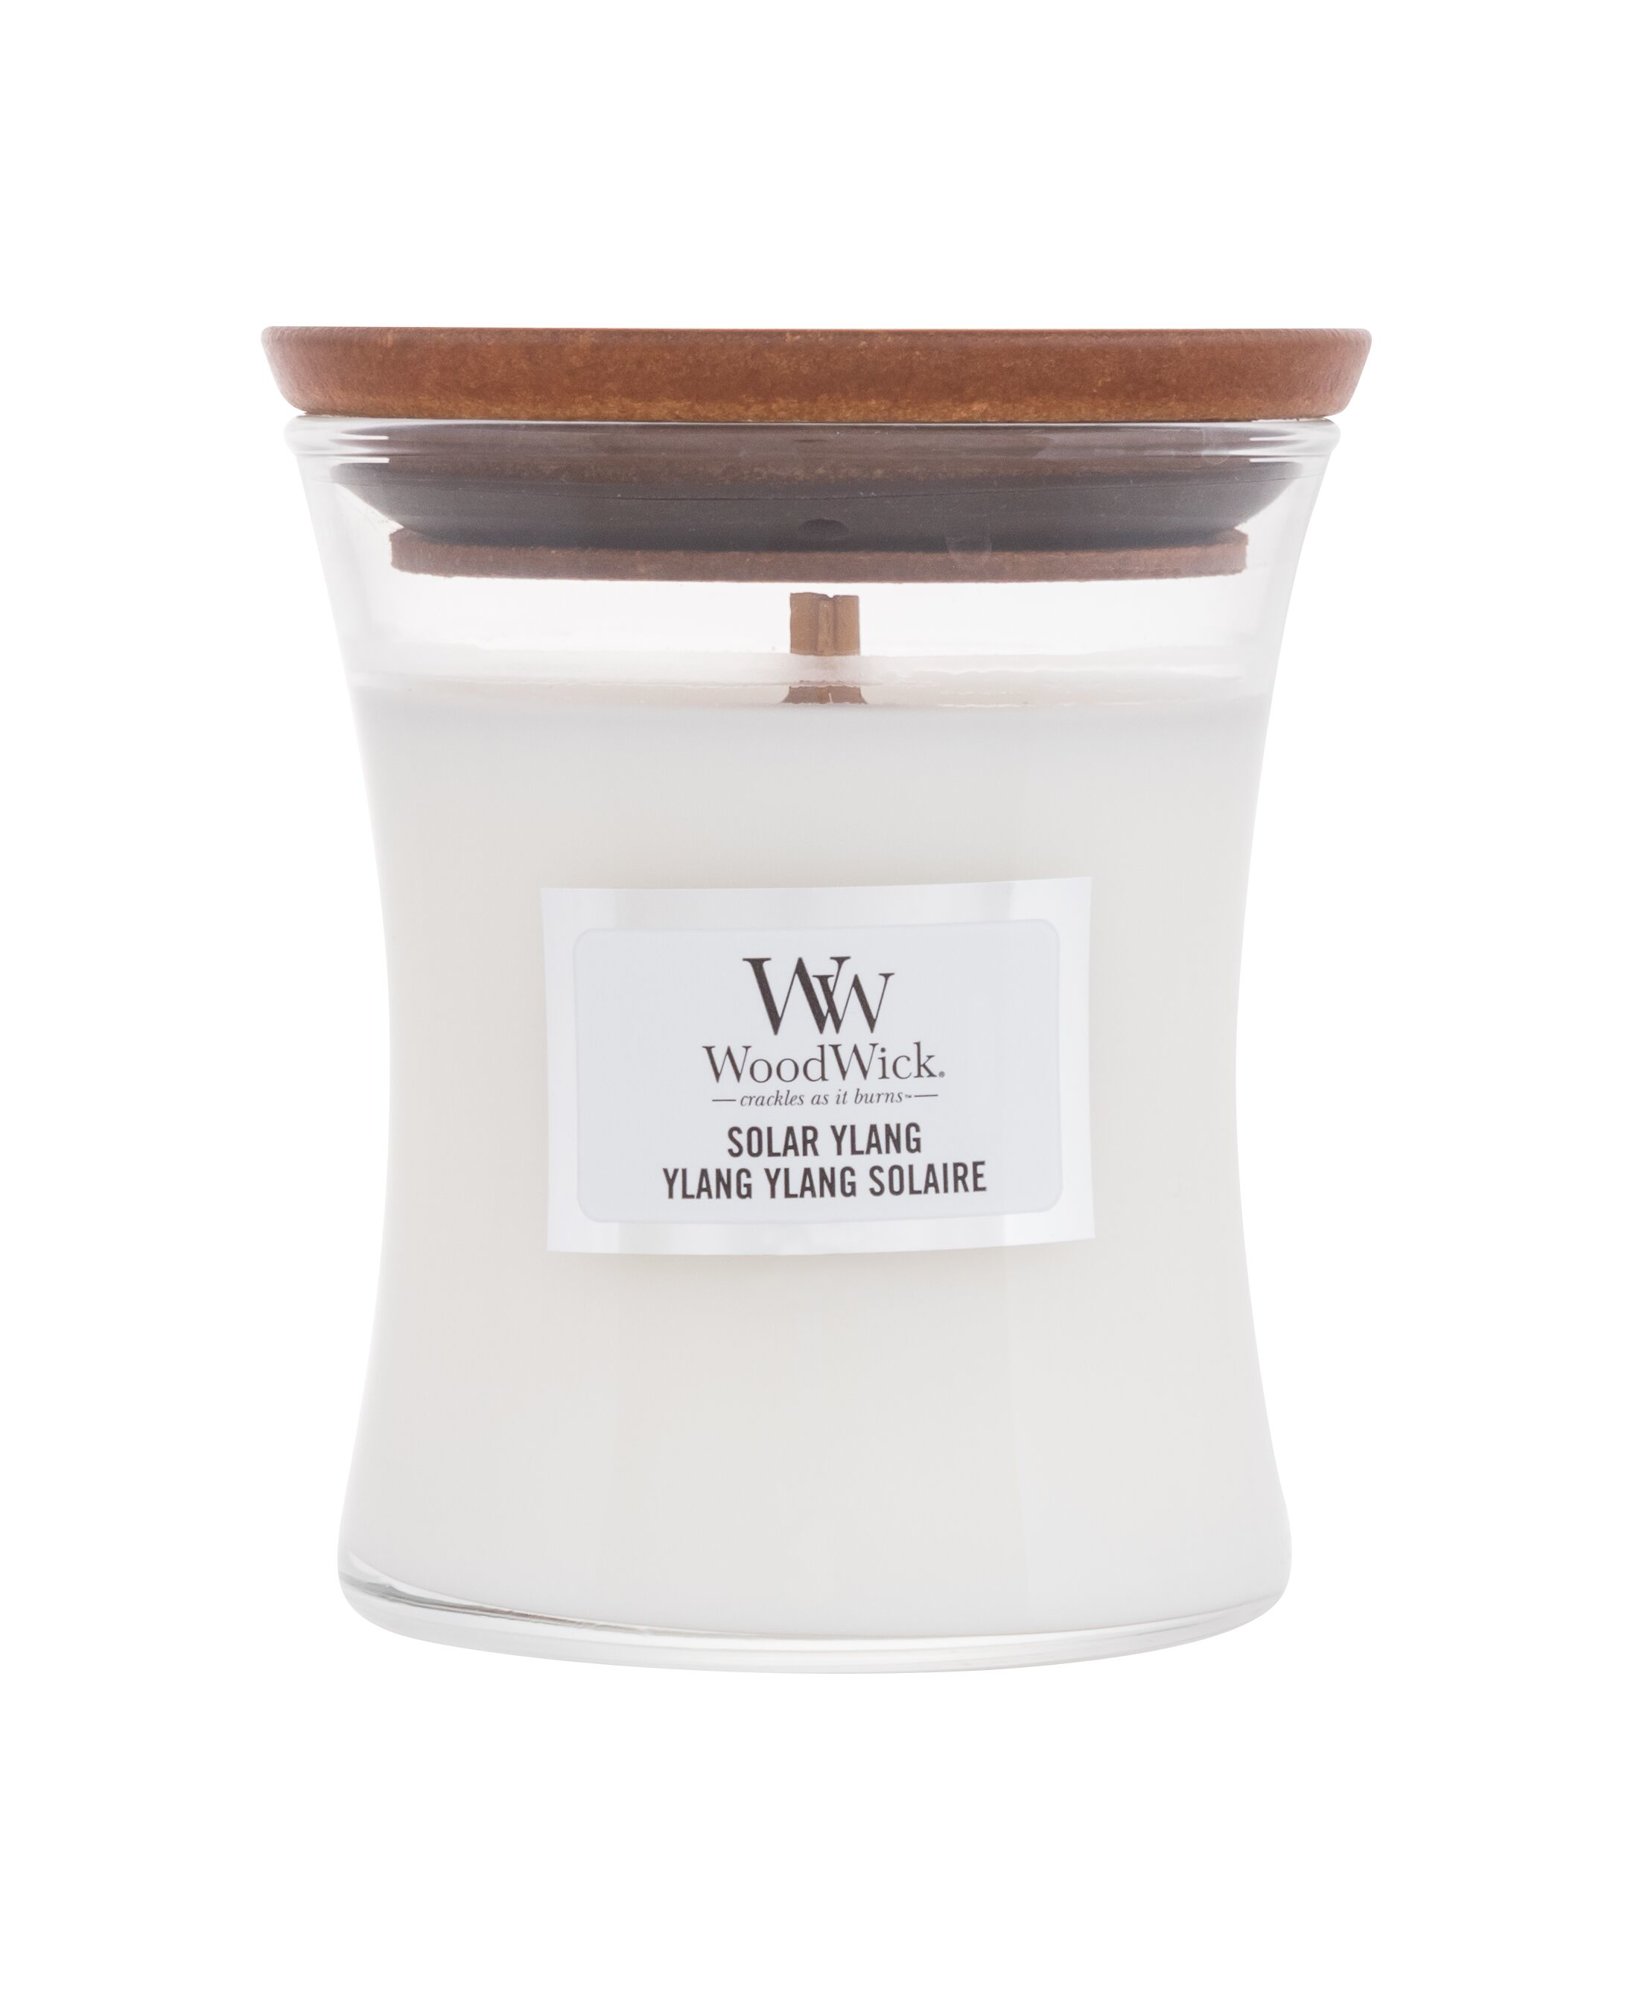 WoodWick Solar Ylang 85g Kvepalai Unisex Scented Candle